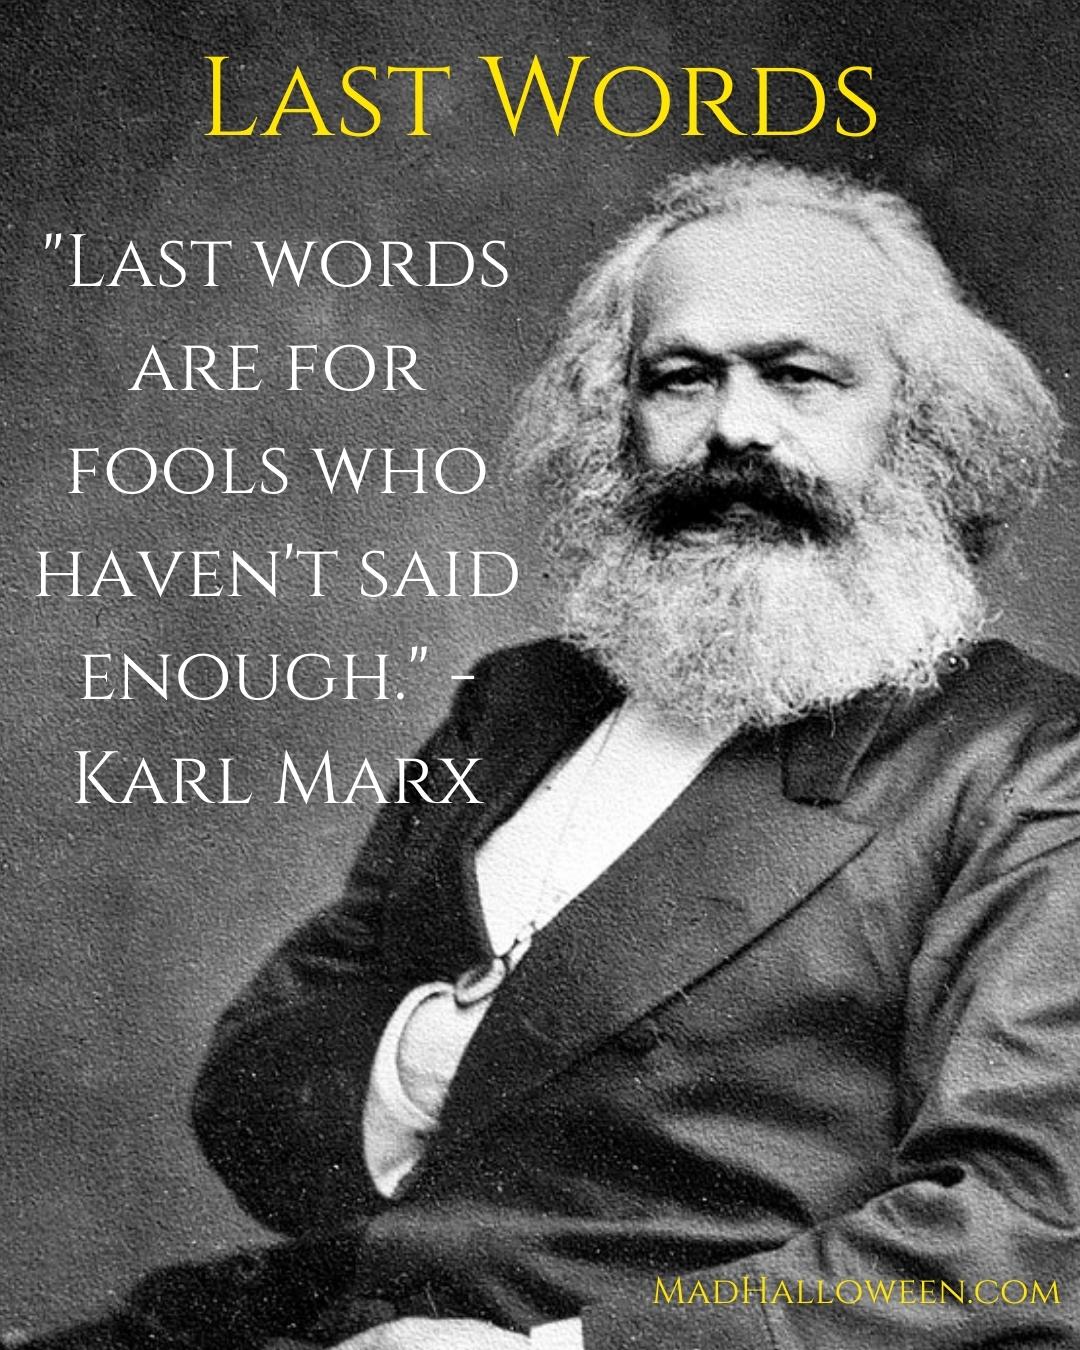 Famous Last Words Quotes of the Departed - Karl Marx - Mad Halloween